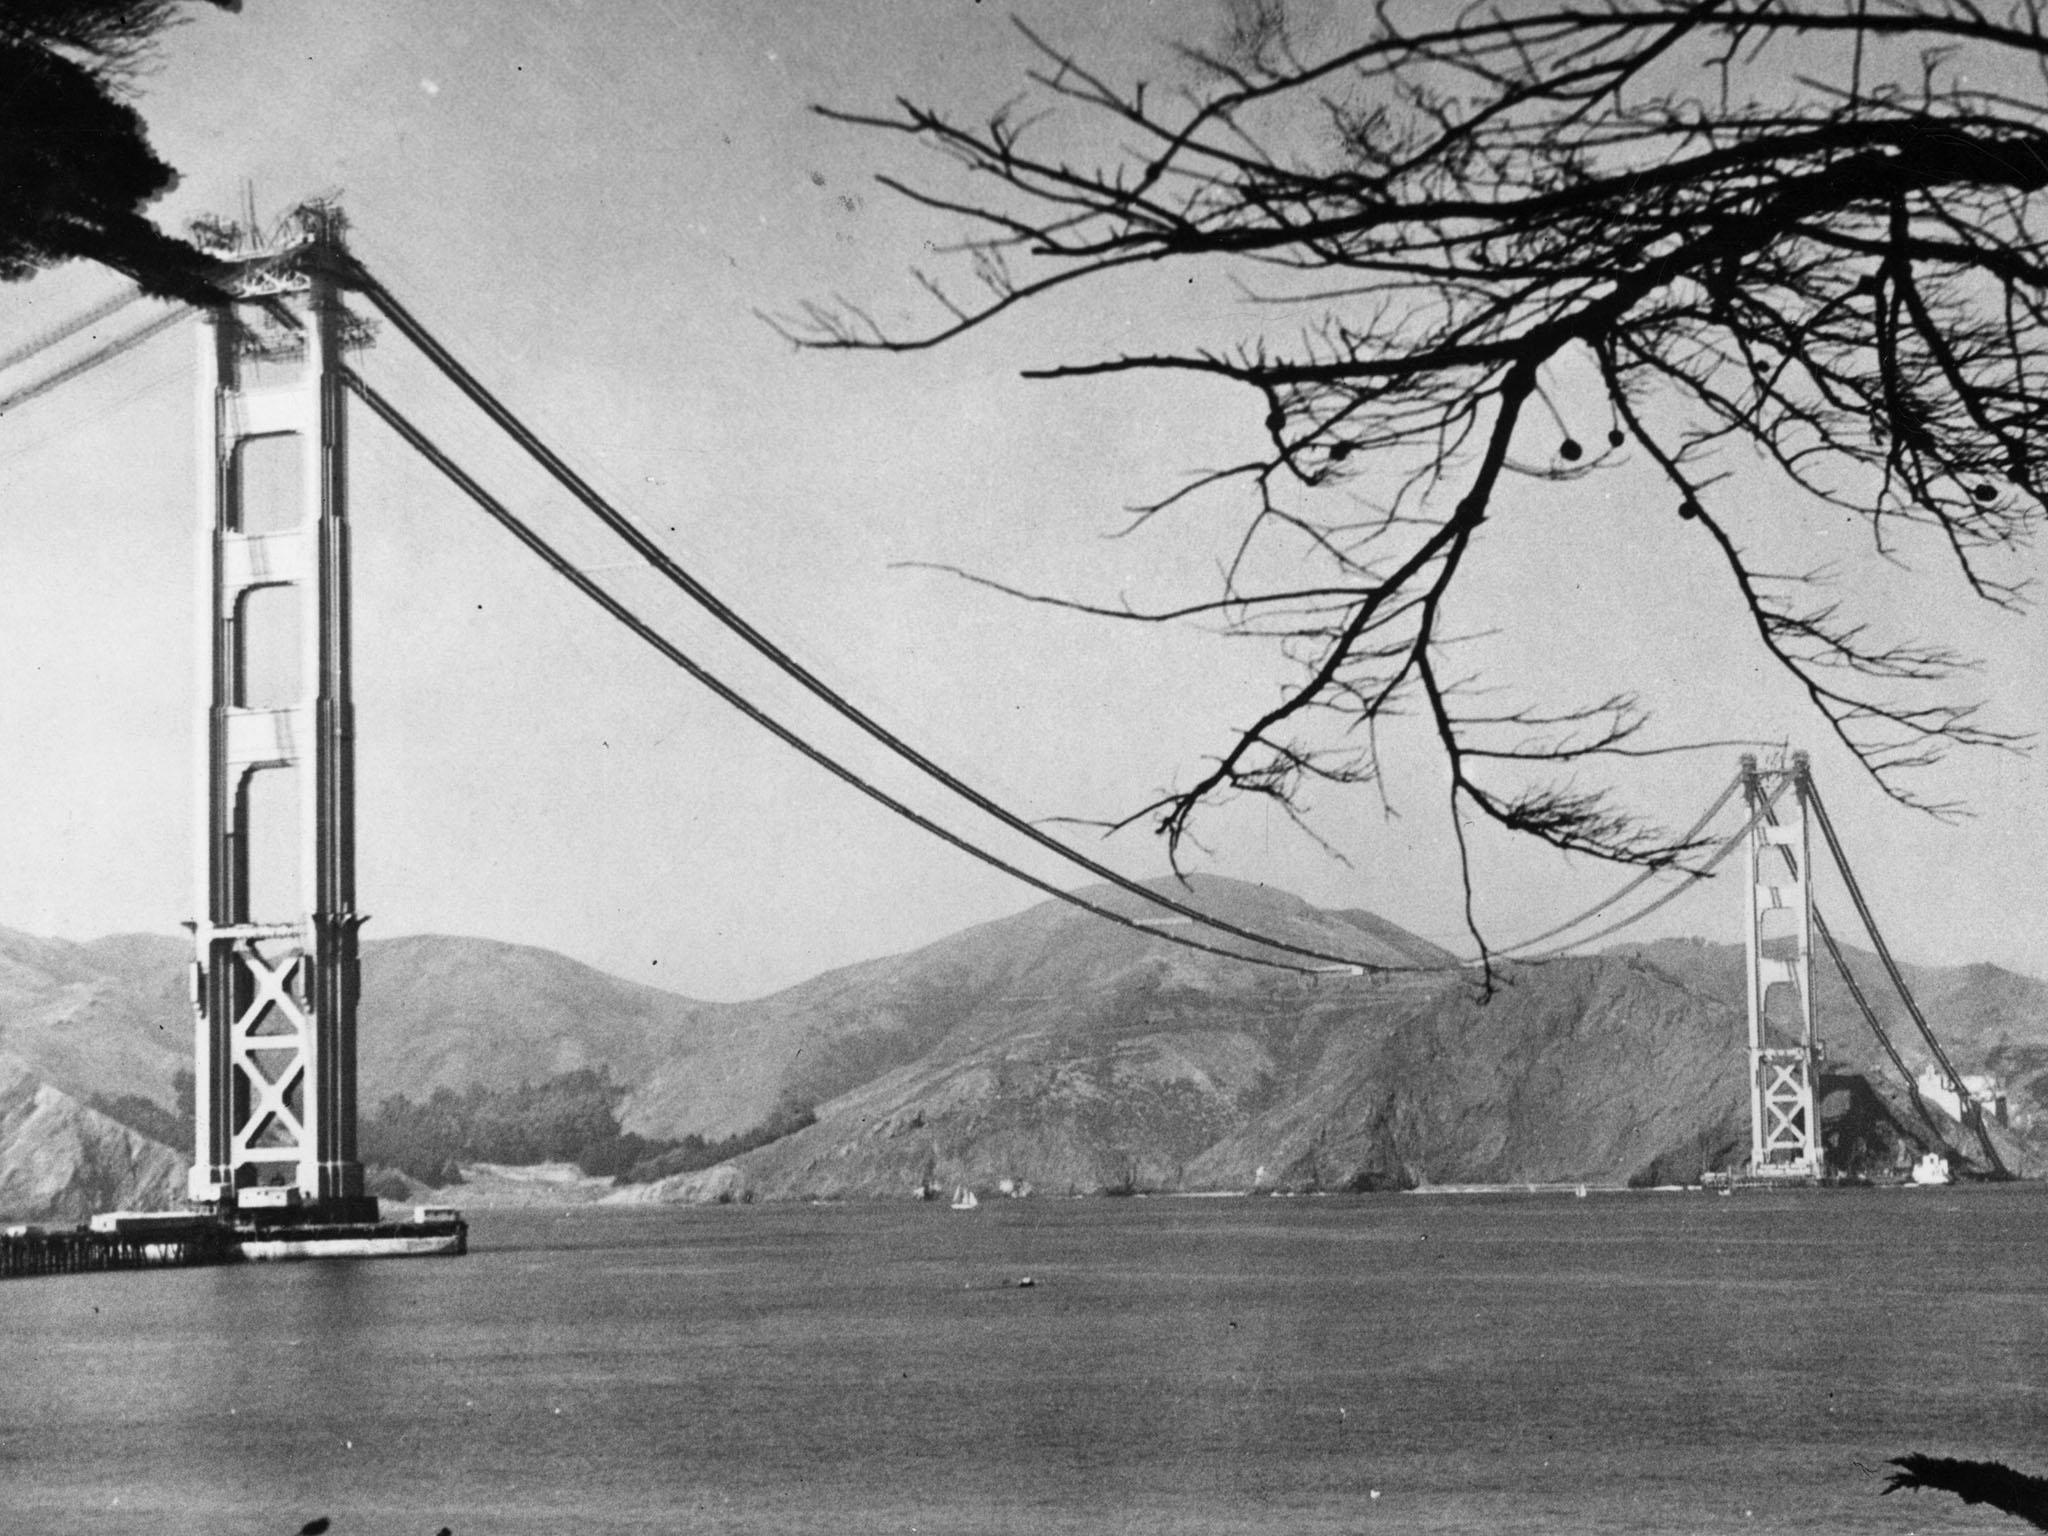 The Golden Gate Bridge opened this day in 1937